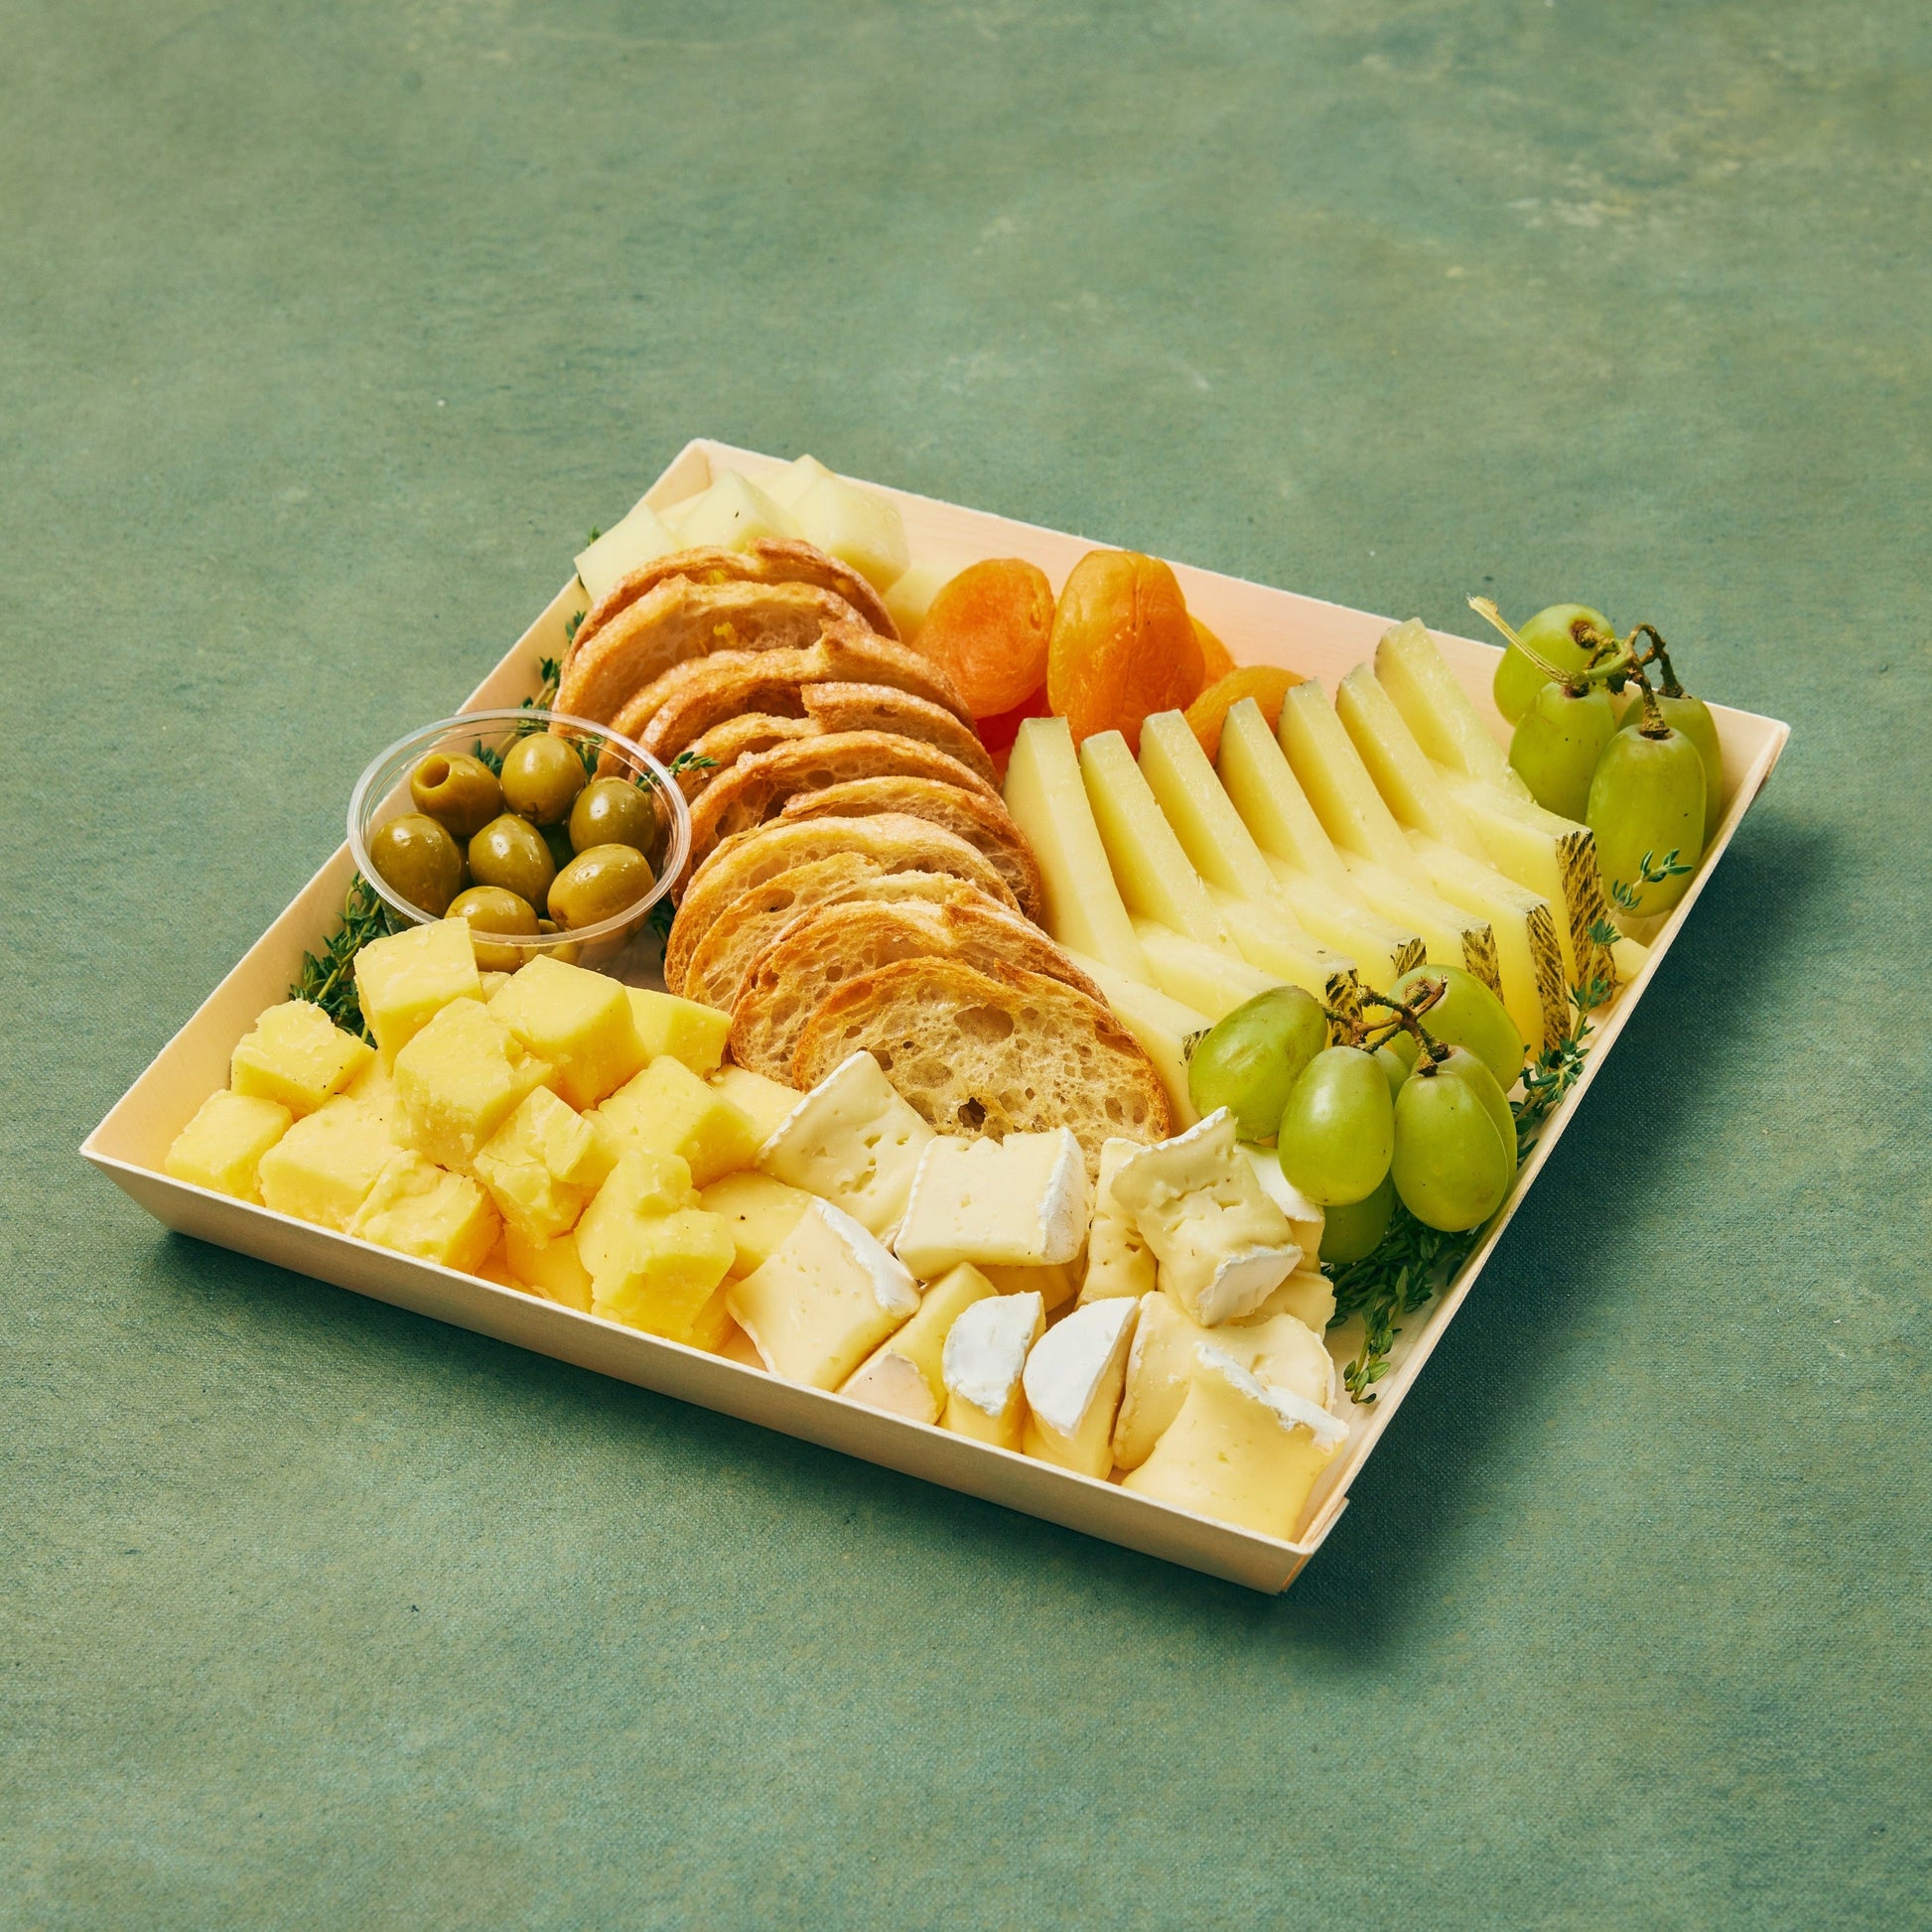 Selection of cheeses, fruits, and crostini